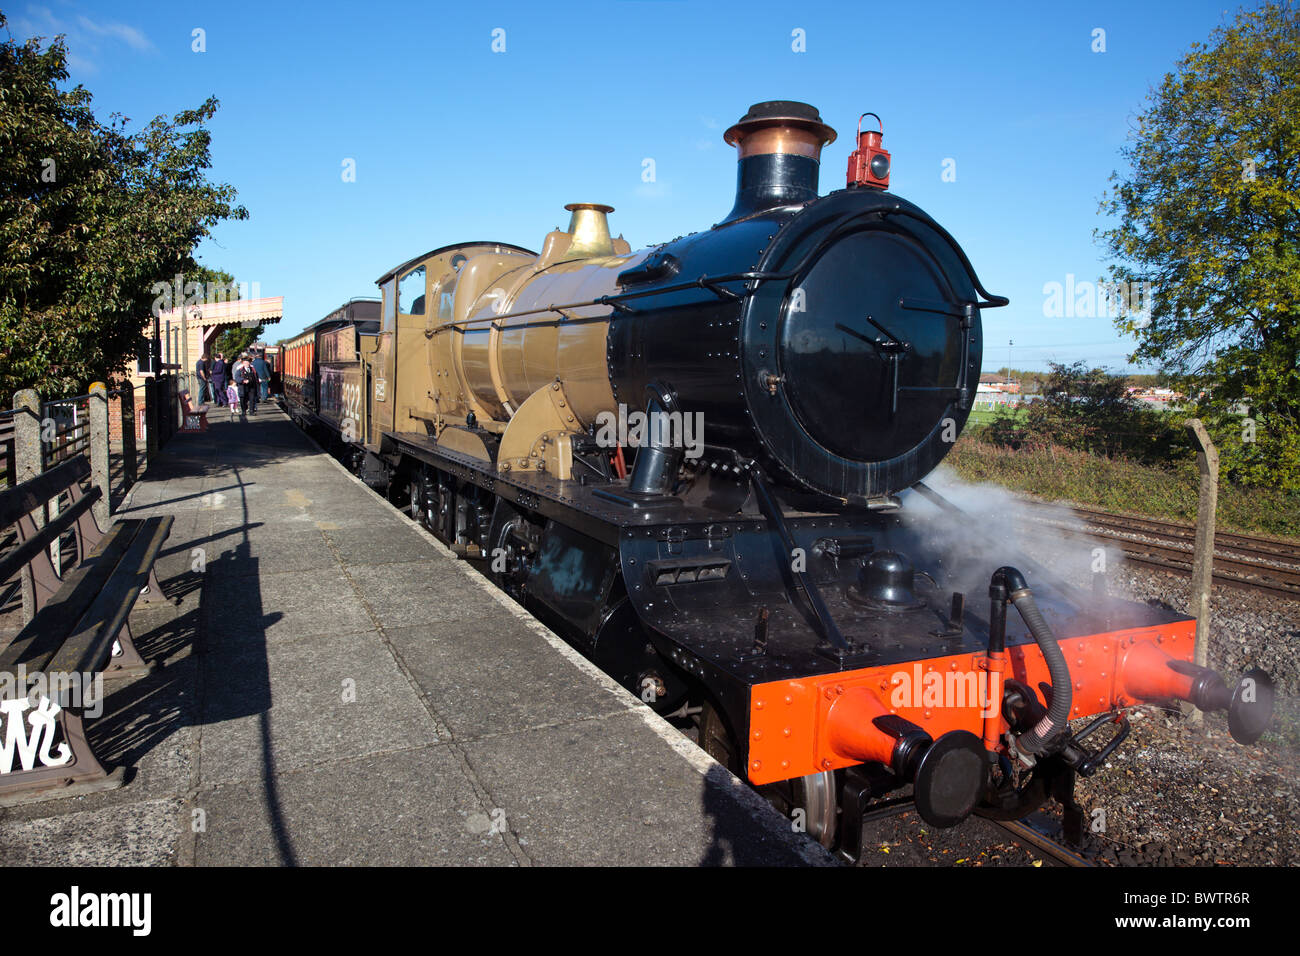 Great Western Railway (GWR) steam locomotive Rod 5322 at Didcot Railway Centre in service Stock Photo